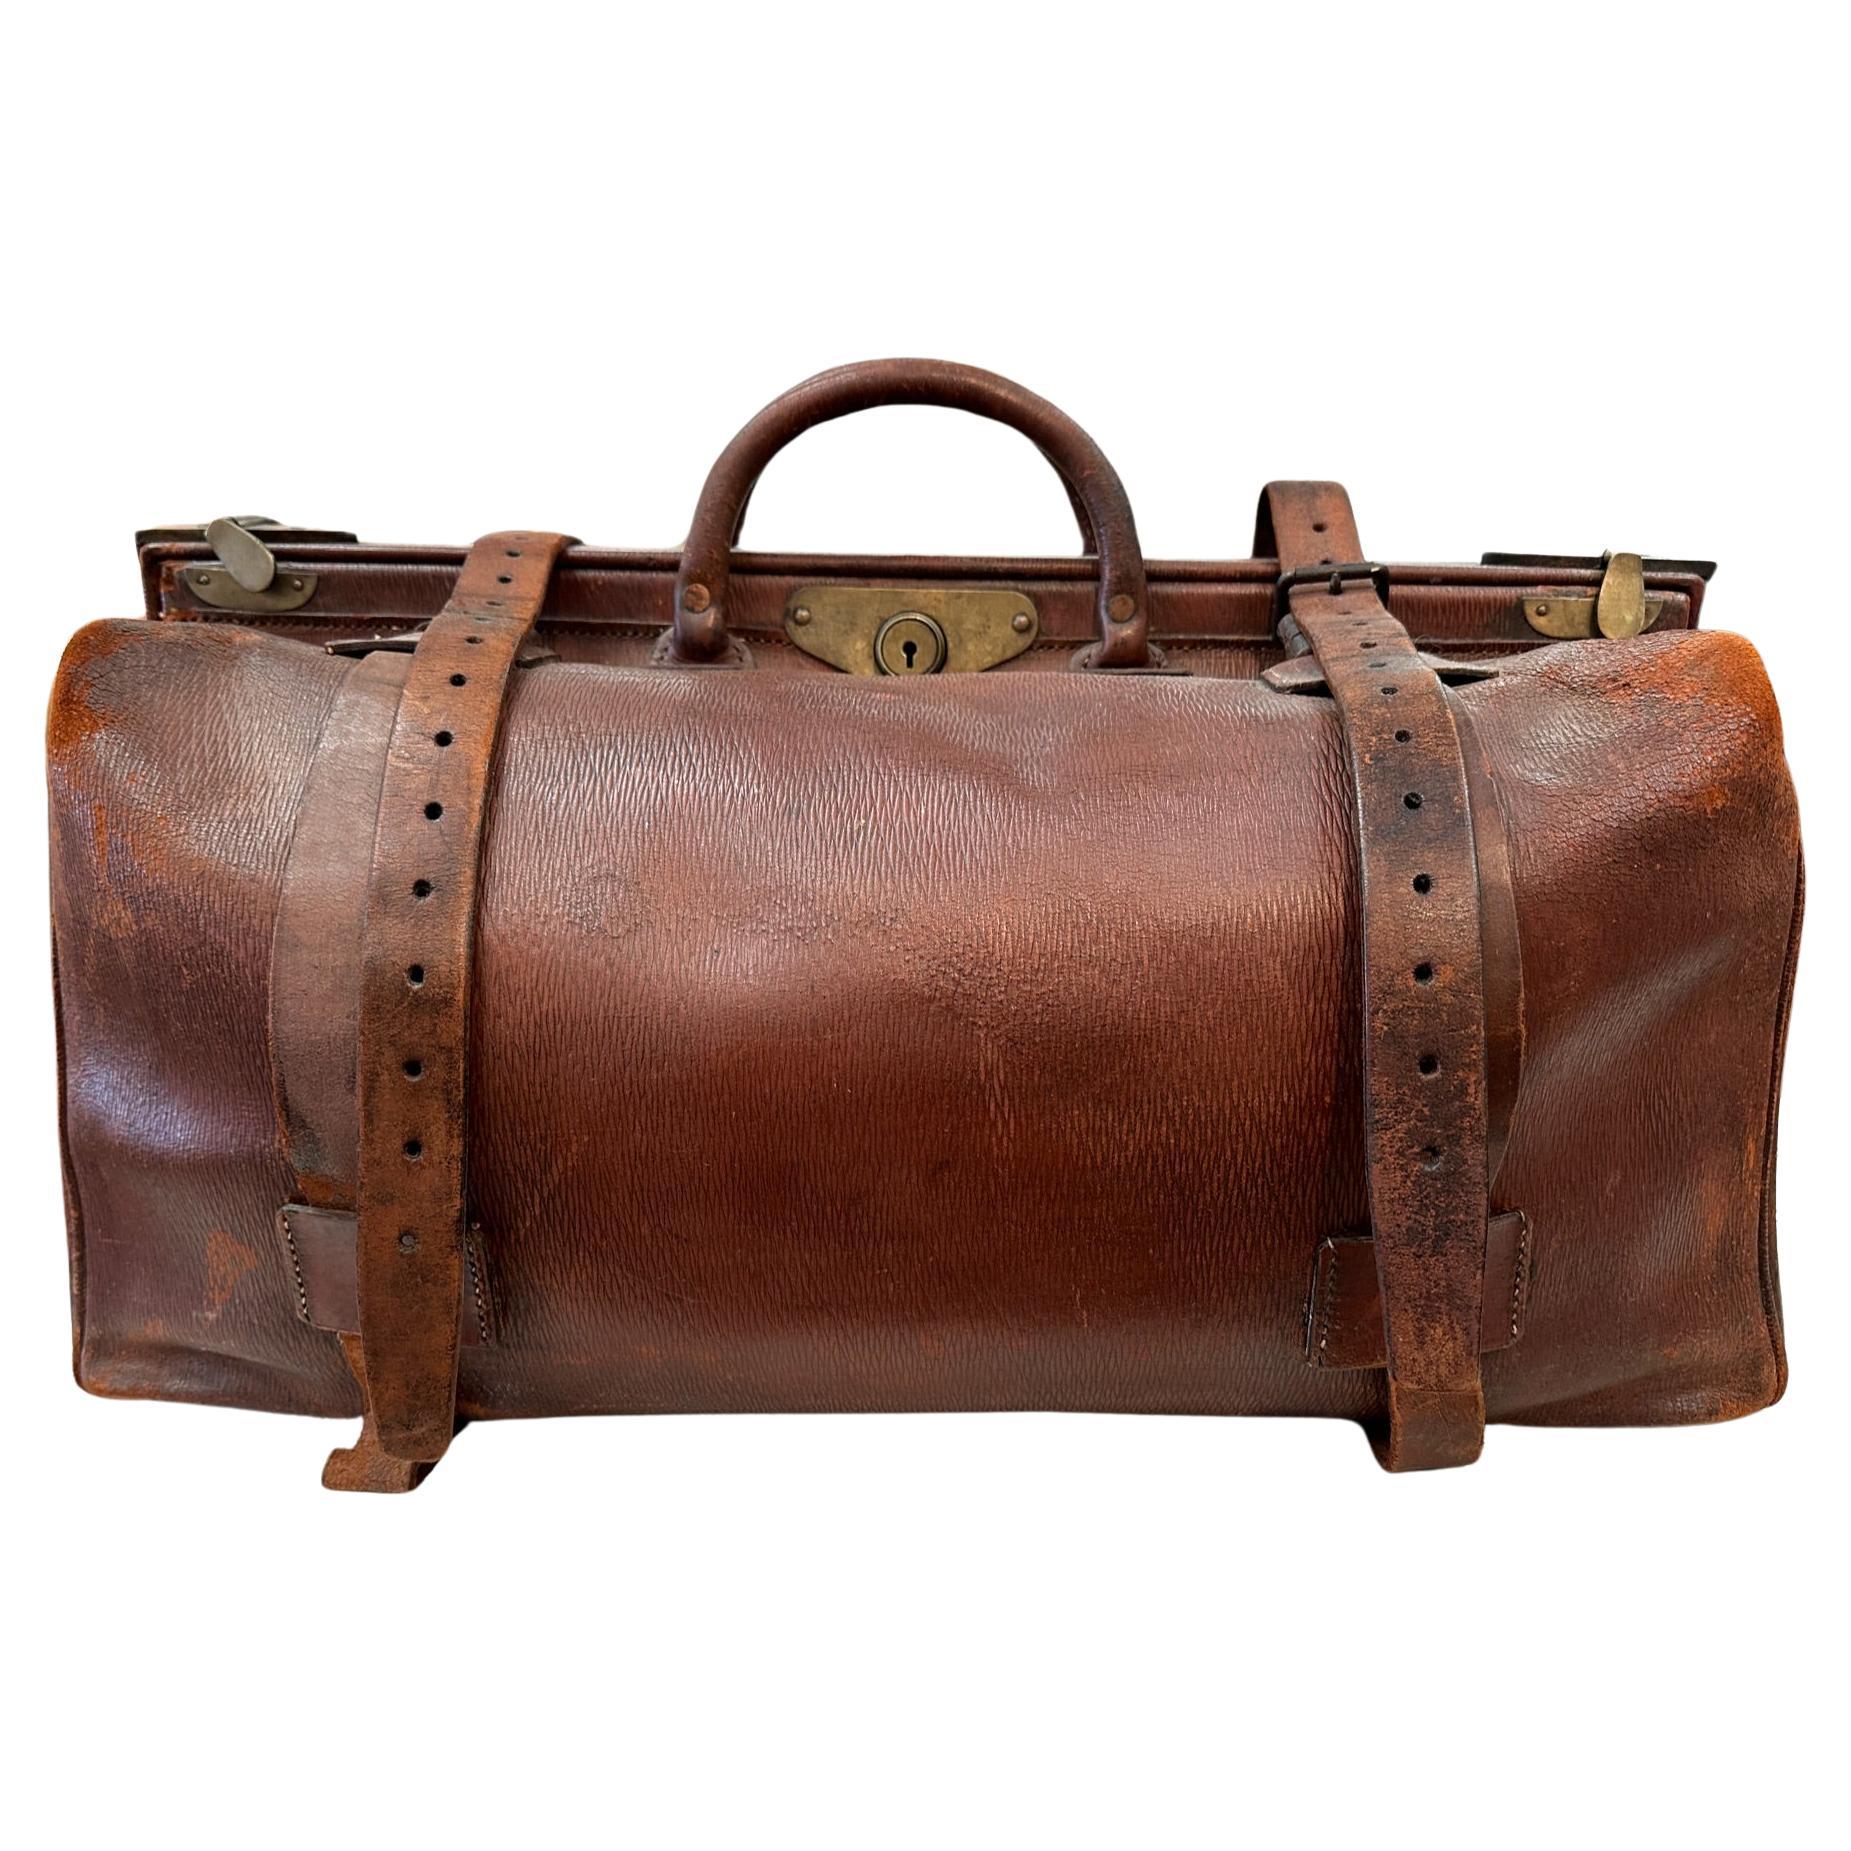 19th Century Large Antique Leather Traveling Luggage with Brass Accents In Good Condition For Sale In Wichita, KS